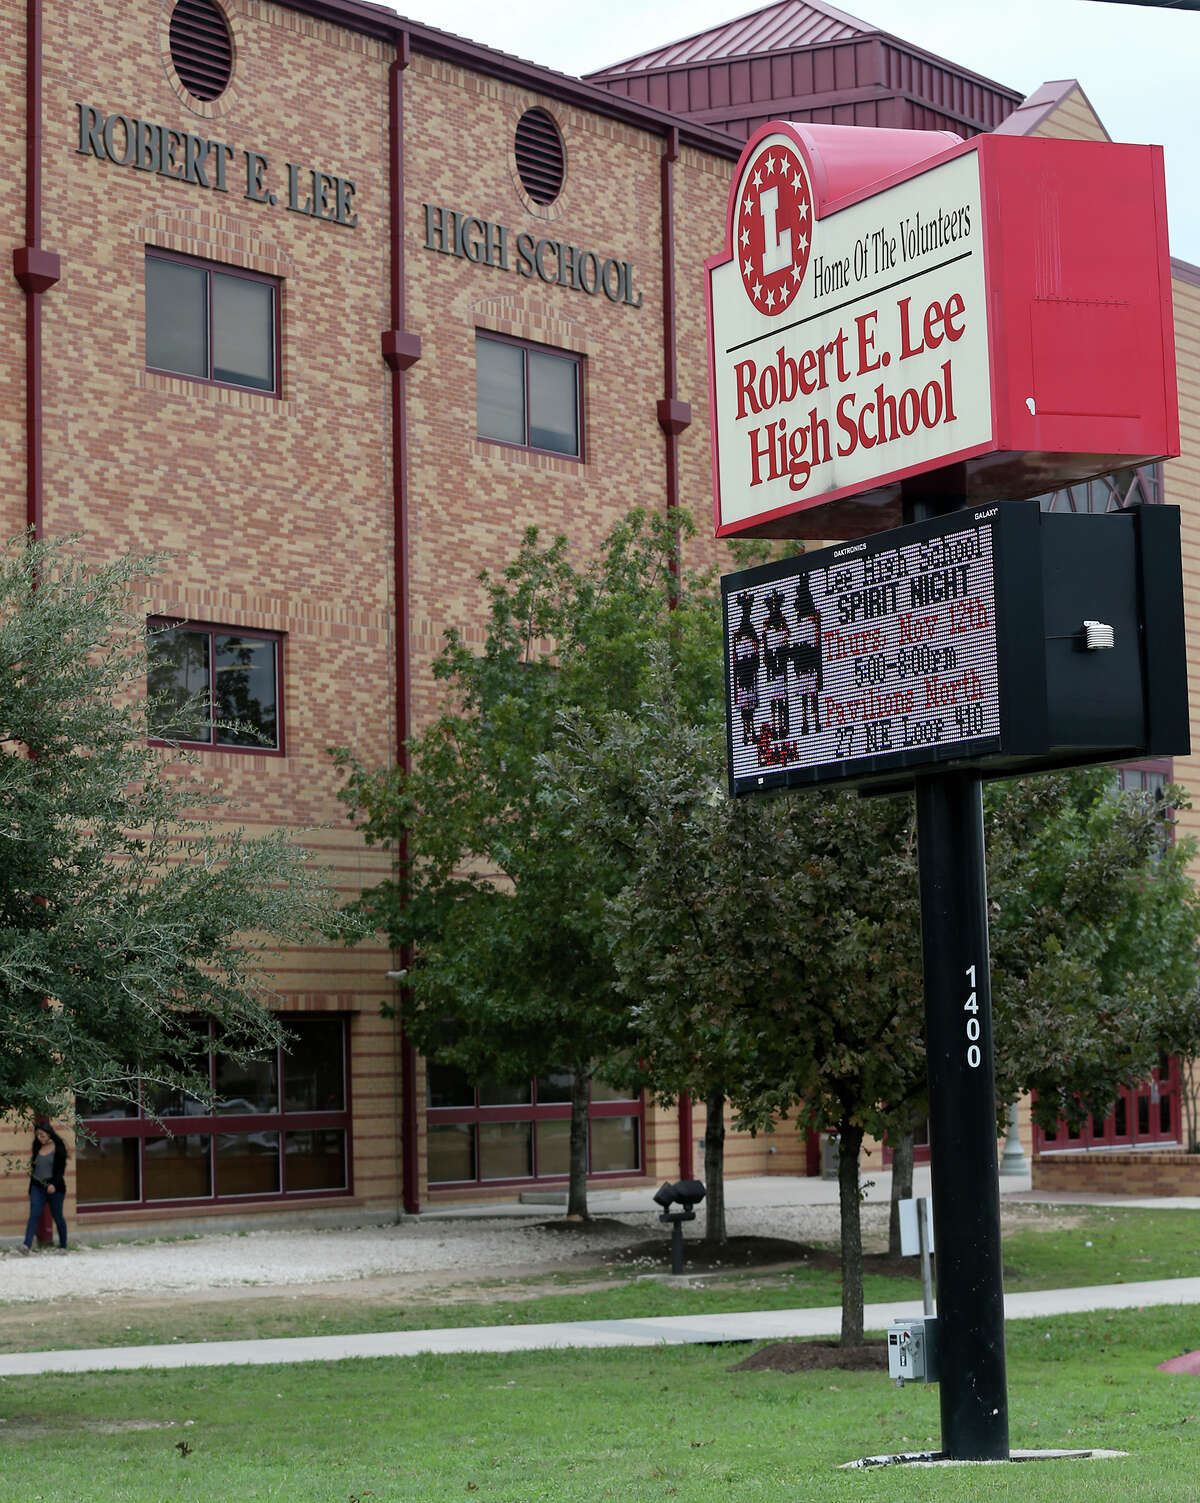 After the NEISD board voted not to rename Robert E. Lee High School, one dissenting trustee said he was concerned the board hadn’t sought input from the broader community.